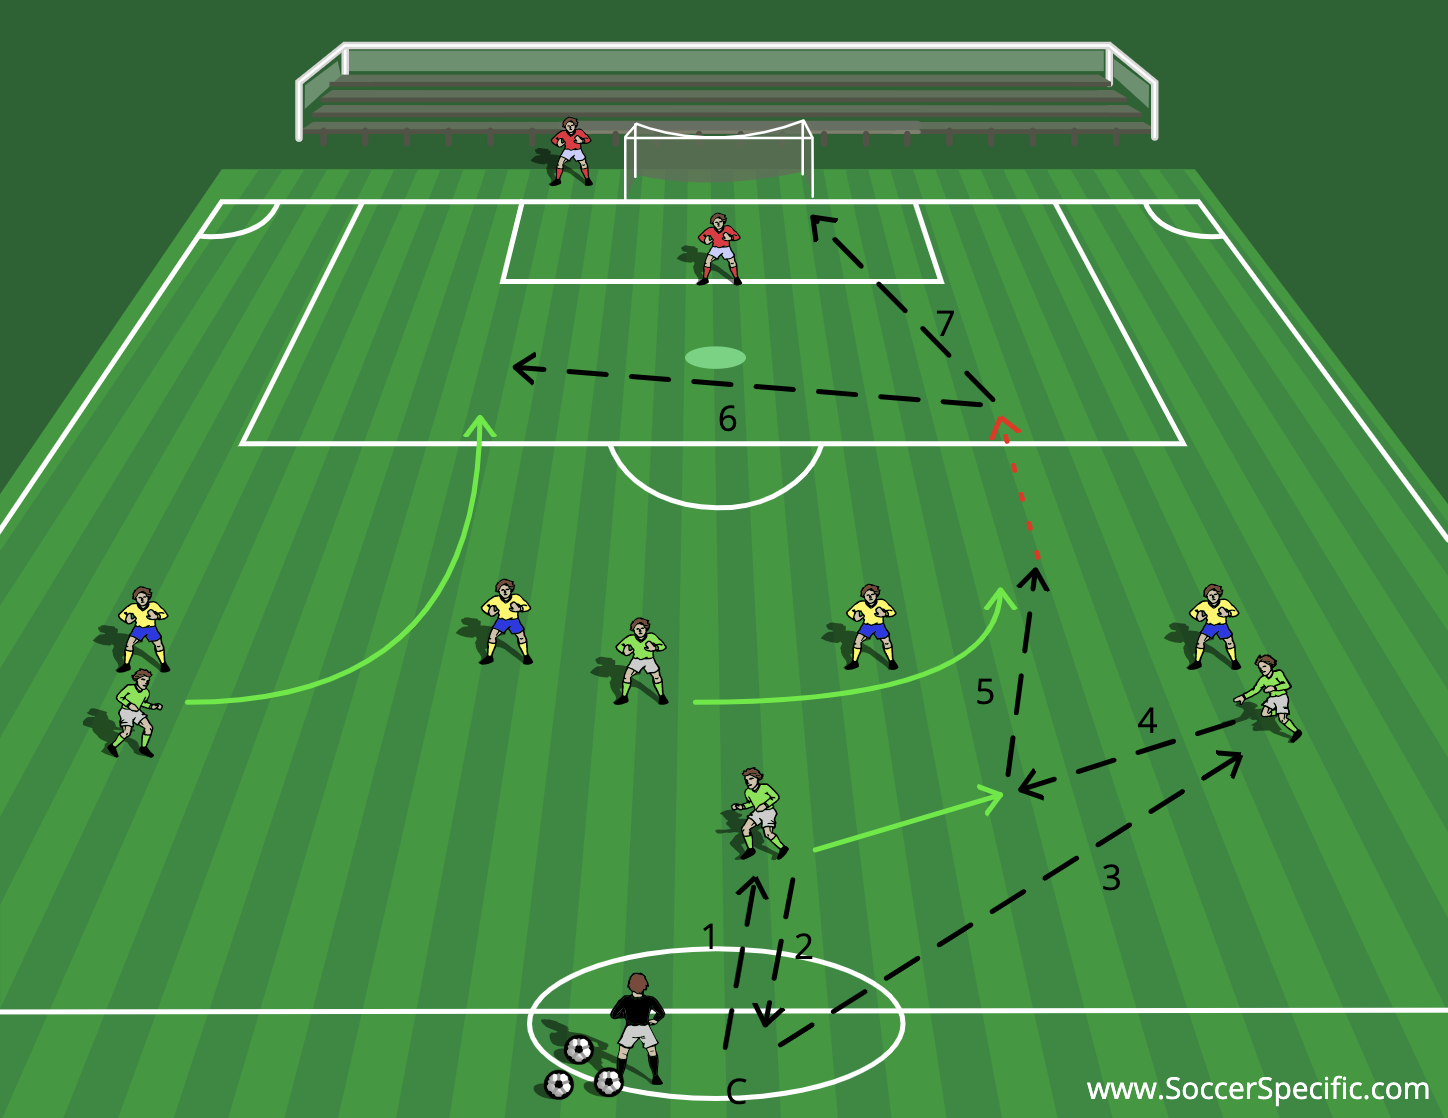 Attacking Patterns to Goal 1 | SoccerSpecific